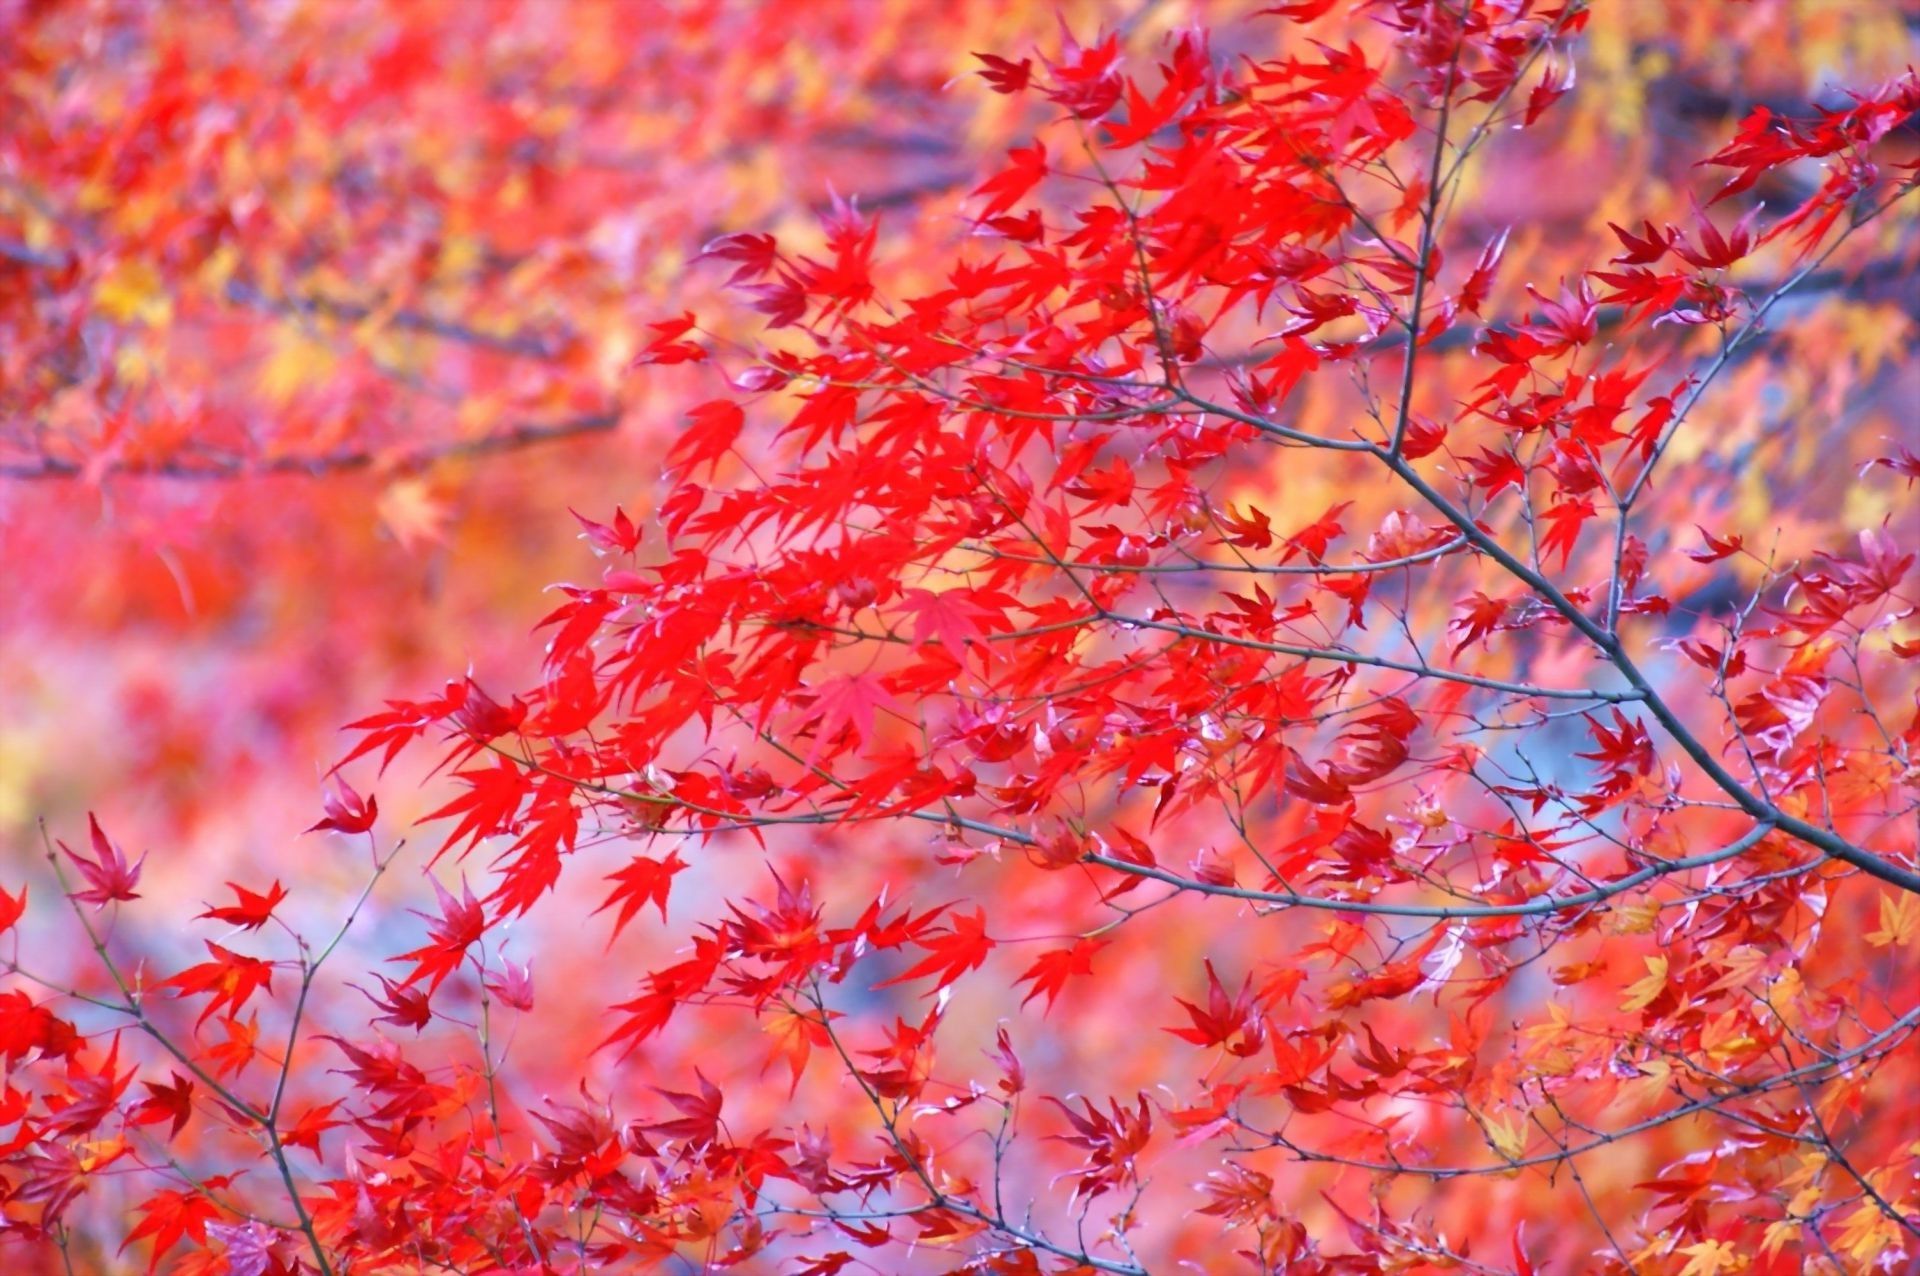 Autumn leaves are bright red branches of the tree